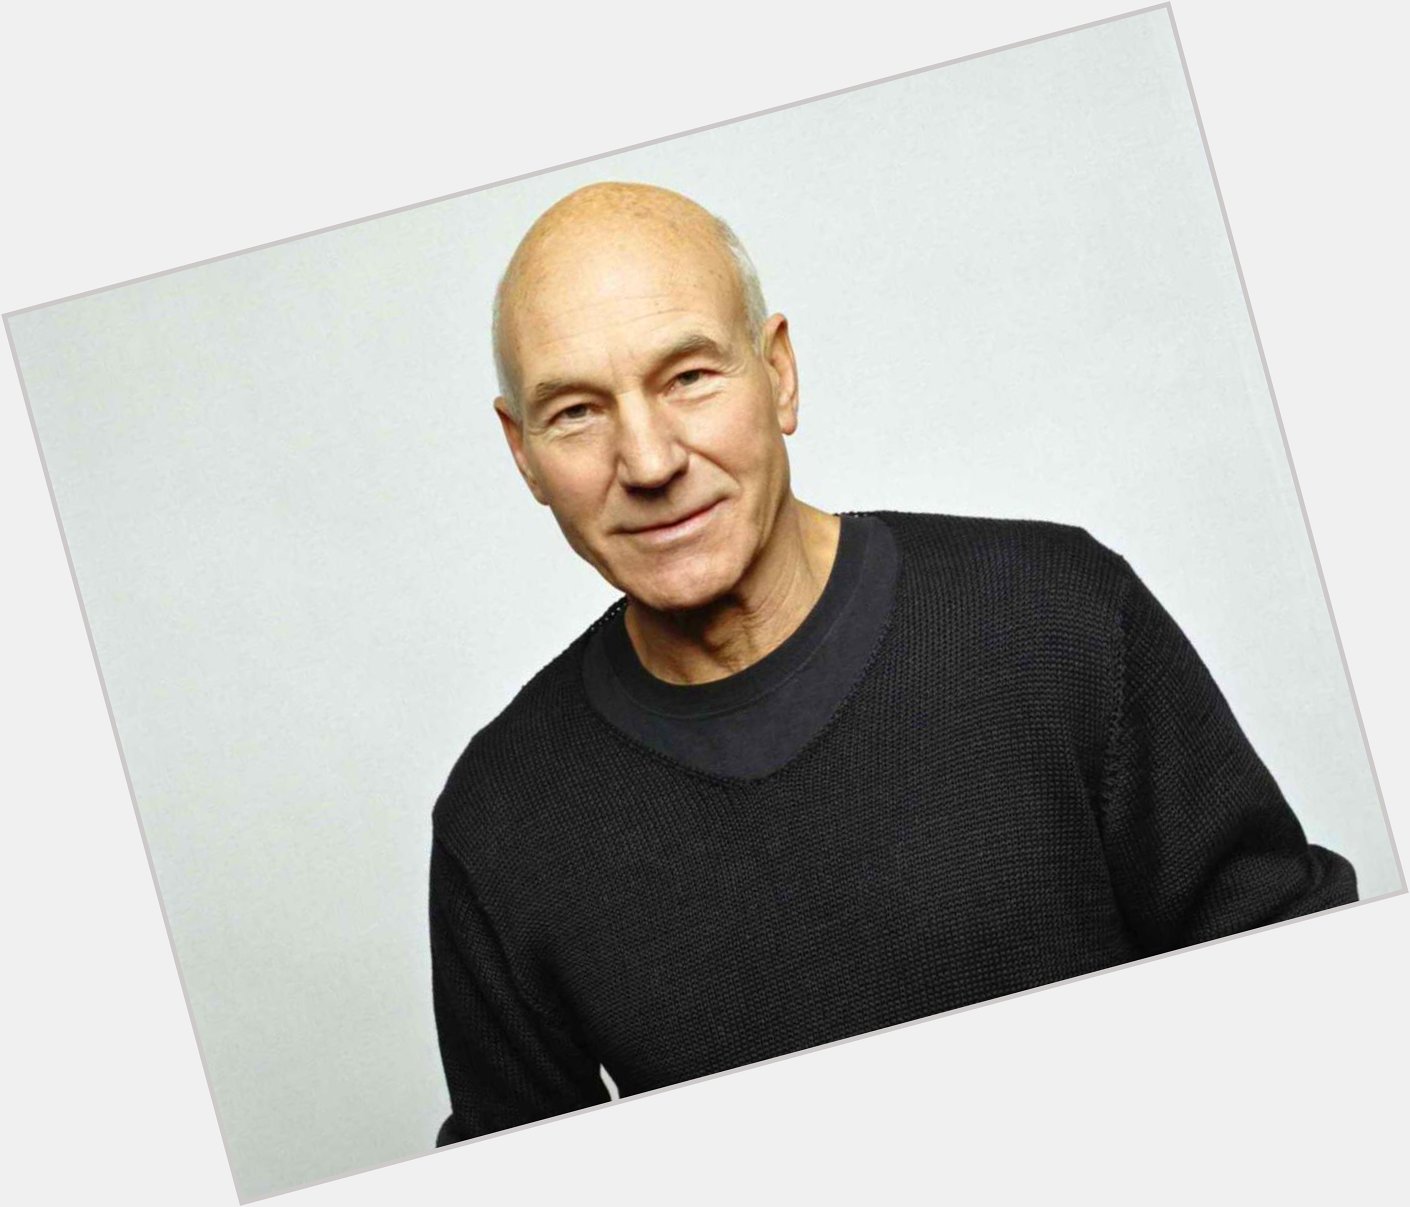 Happy 75th birthday to (Sir. Patrick Stewart)!  A true class act and all around good guy. 